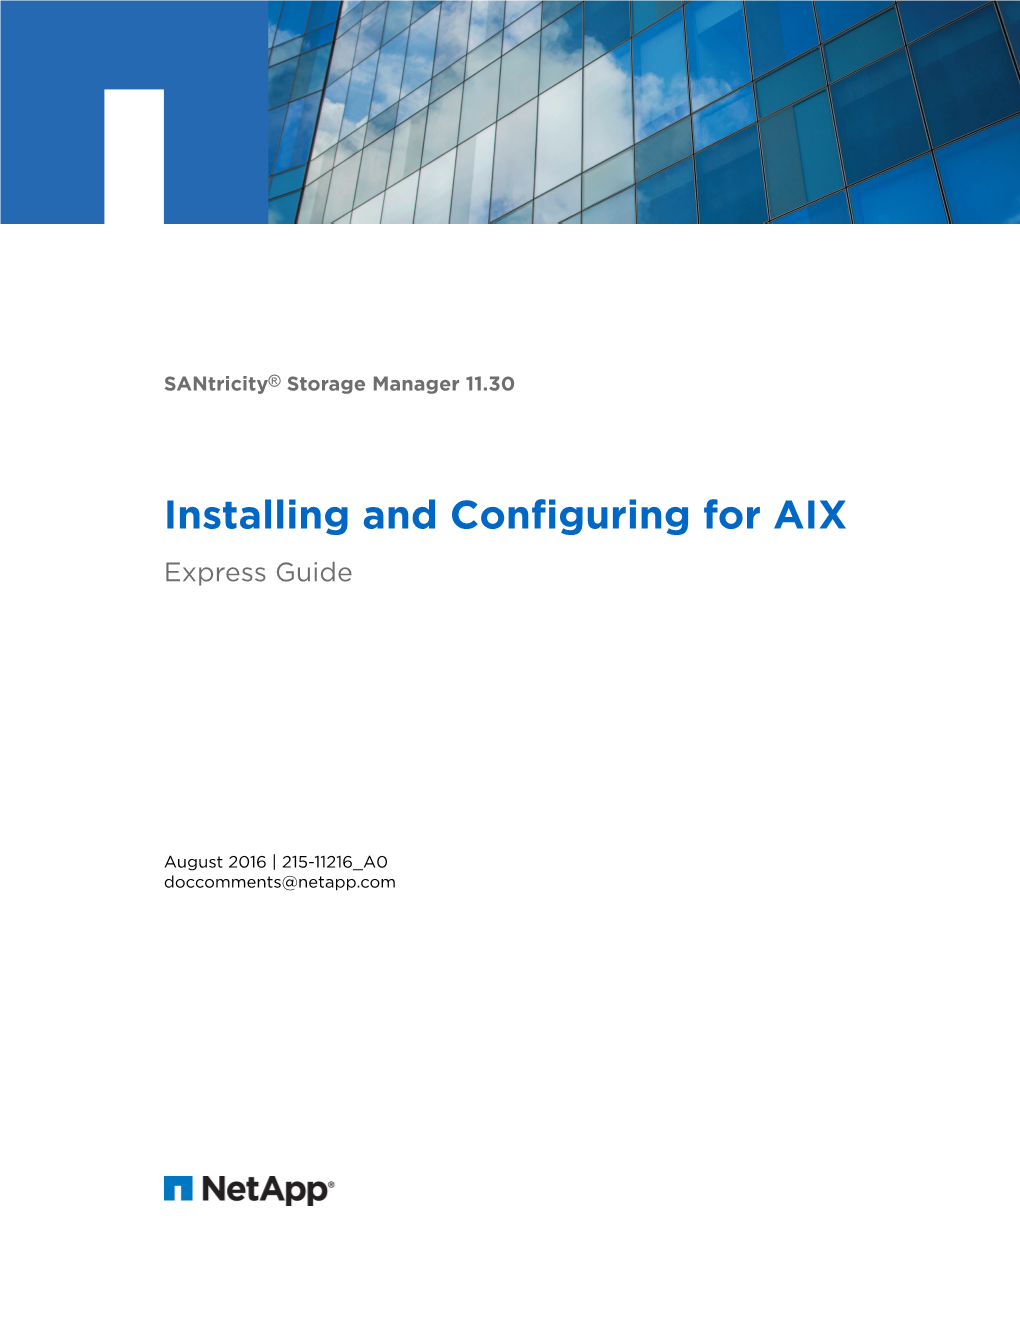 Installing and Configuring for AIX Express Guide